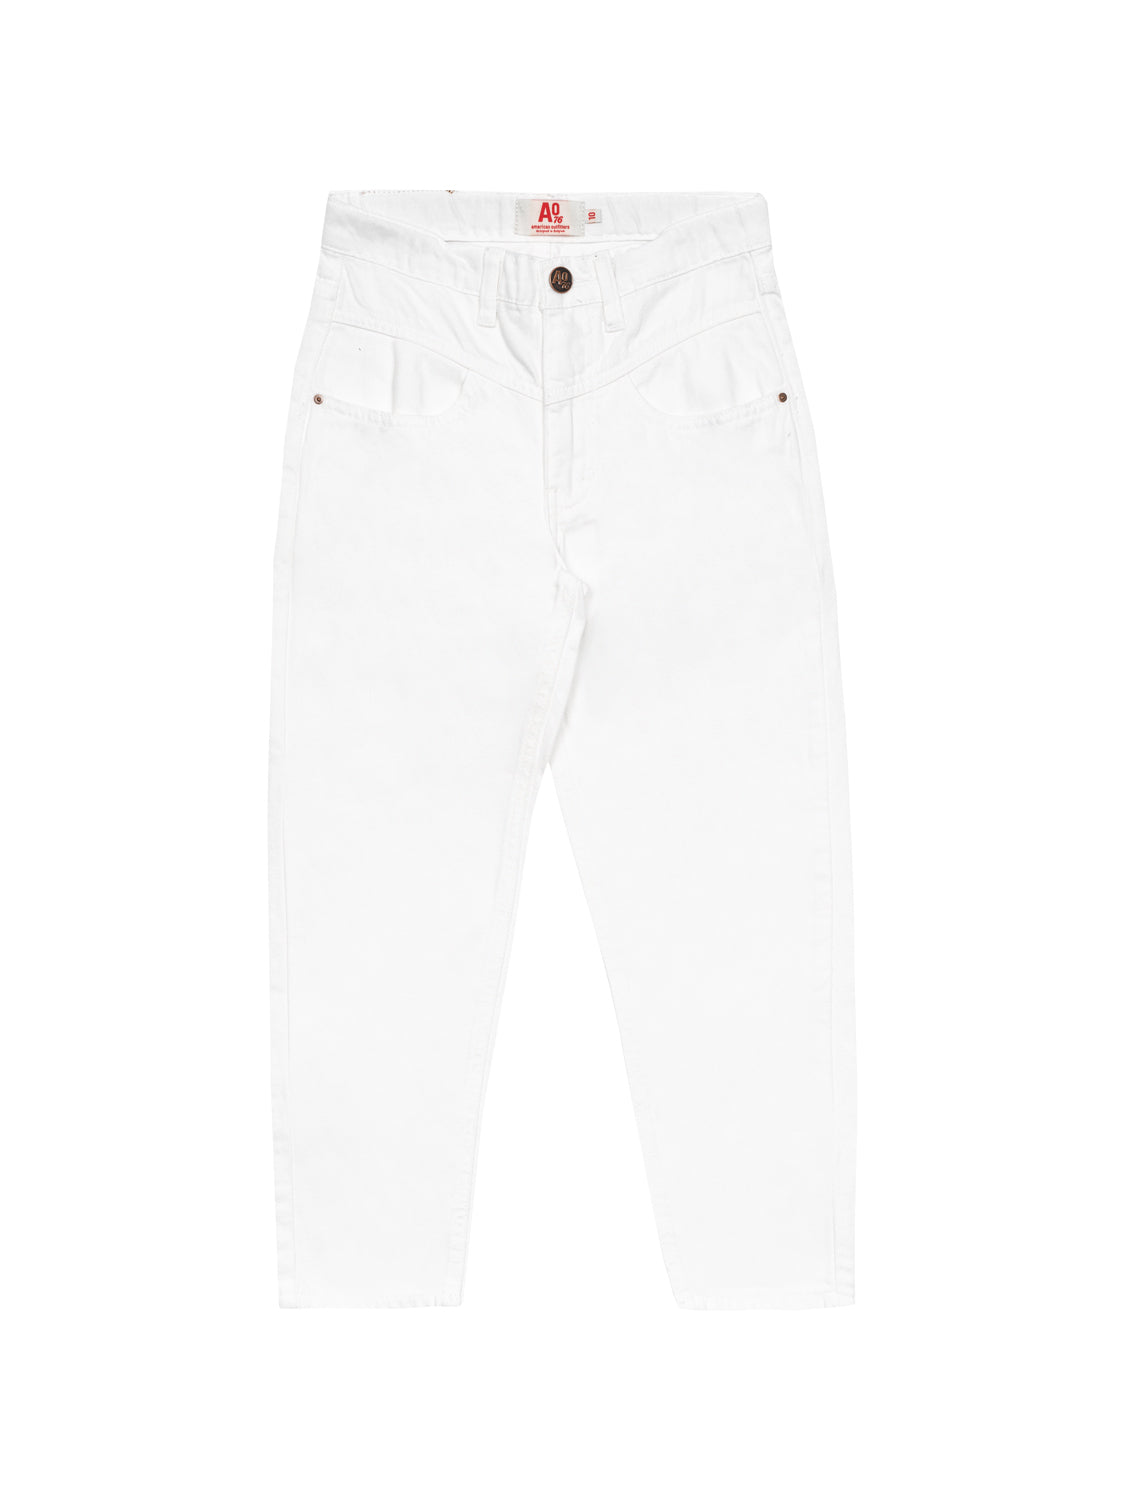 Juna tapered fit Jeans - White